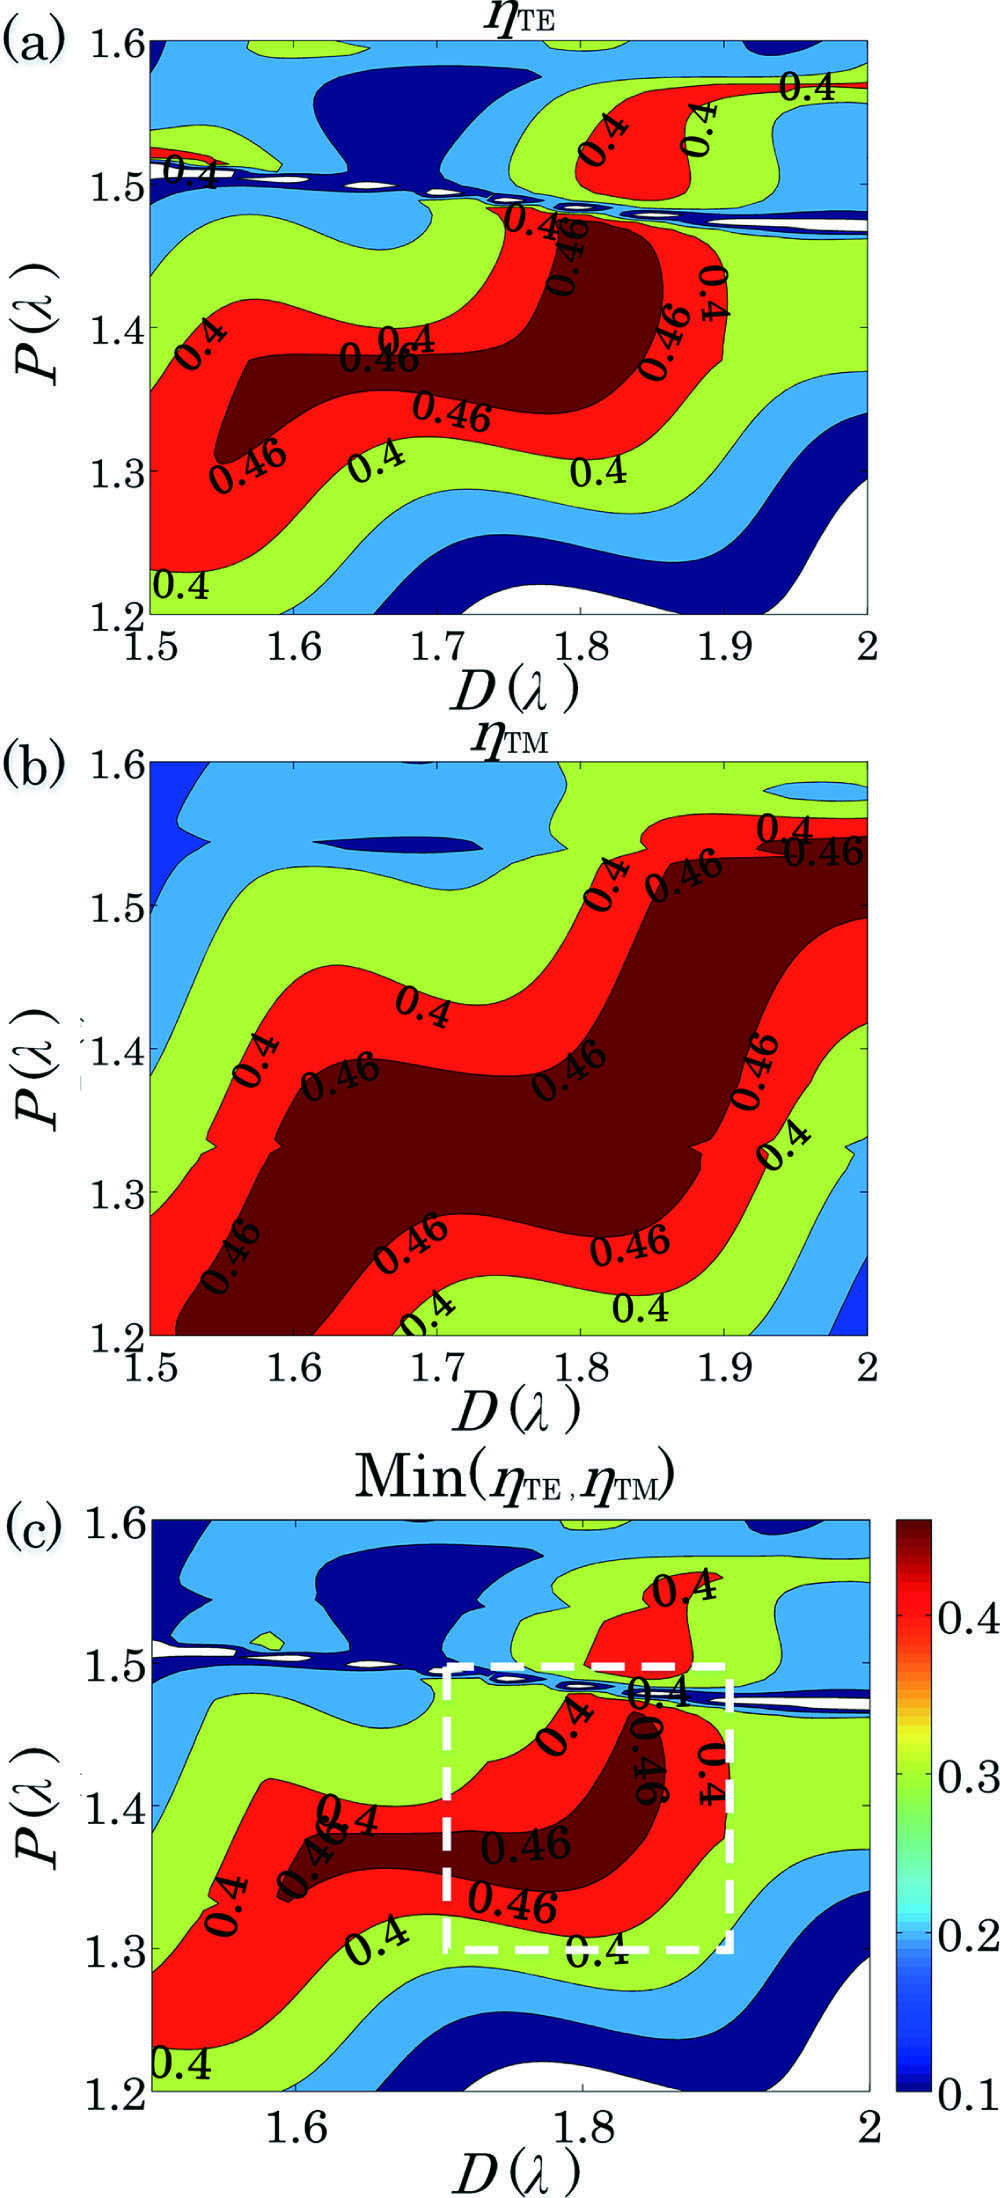 Theoretical grating efficiency as a function of two unified parameters, grating period P and groove depth D under (a) TE polarization, (b) TM polarization, and (c) the minimum of the ηTE and ηTM at each point.